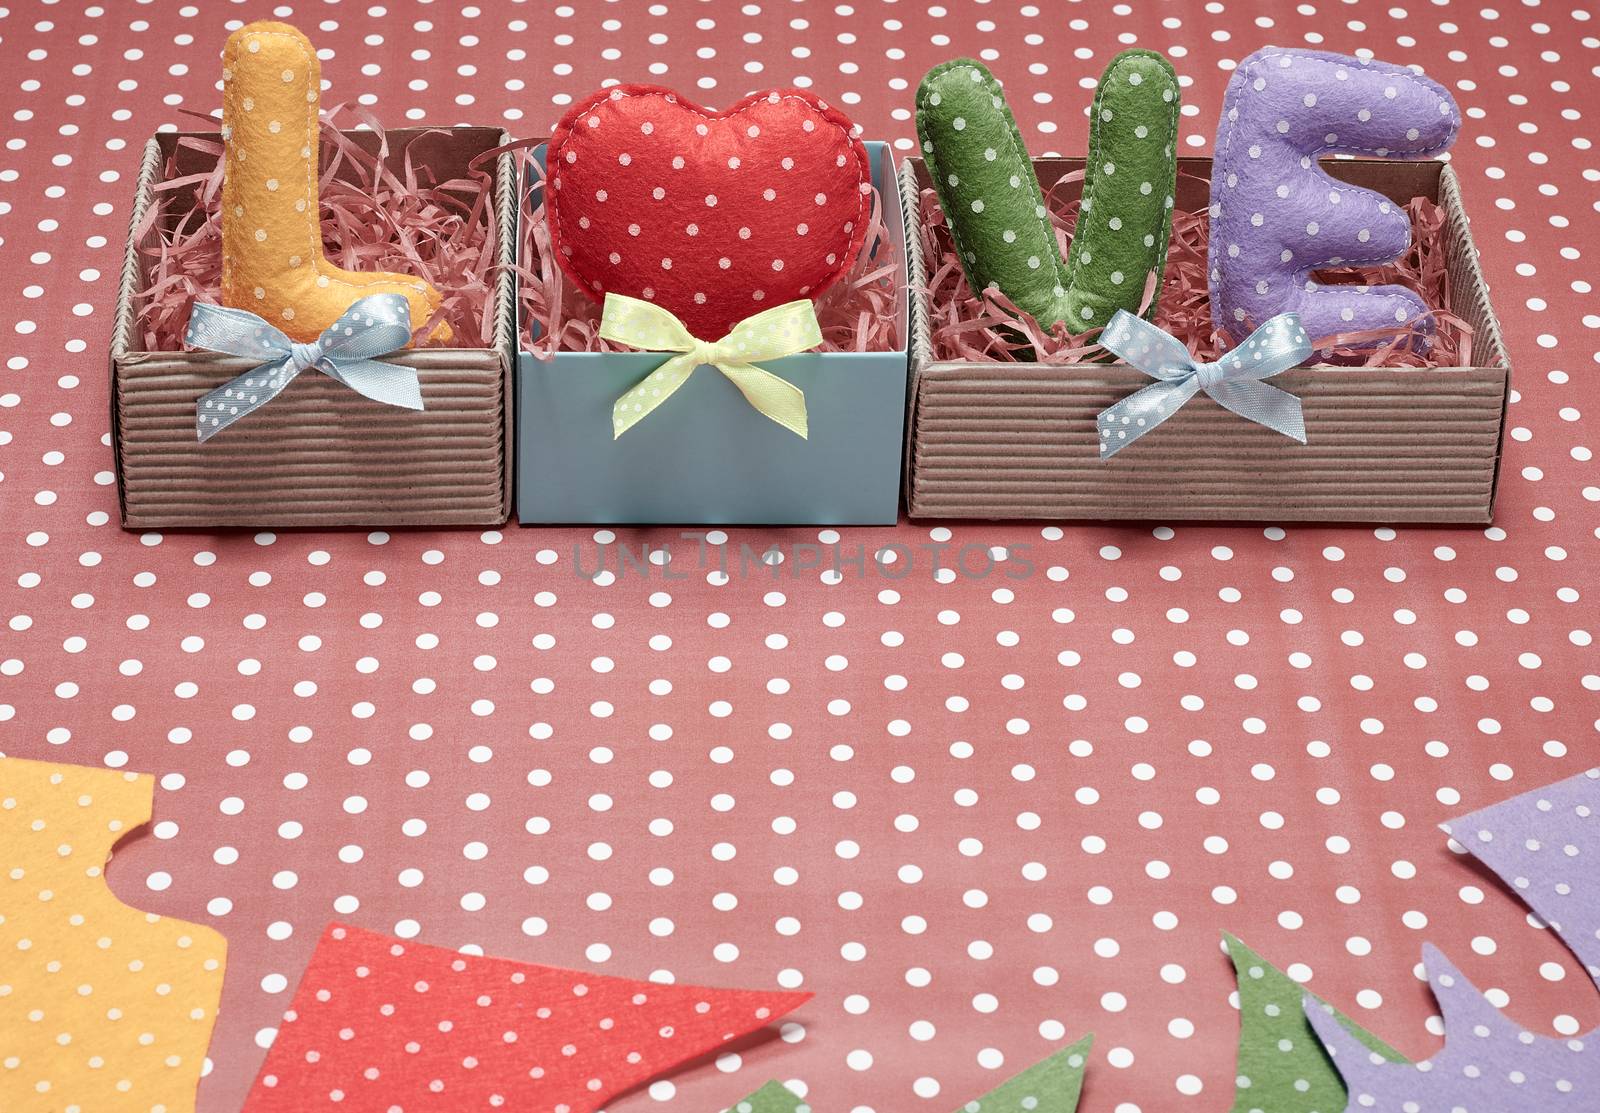 Love, Valentines Day. Word Love polka dots, Heart Handmade in gift boxes, ribbons. Retro vintage romantic style, toned. Vivid unusual creative art greeting card, multicolored felt, present, copyspace